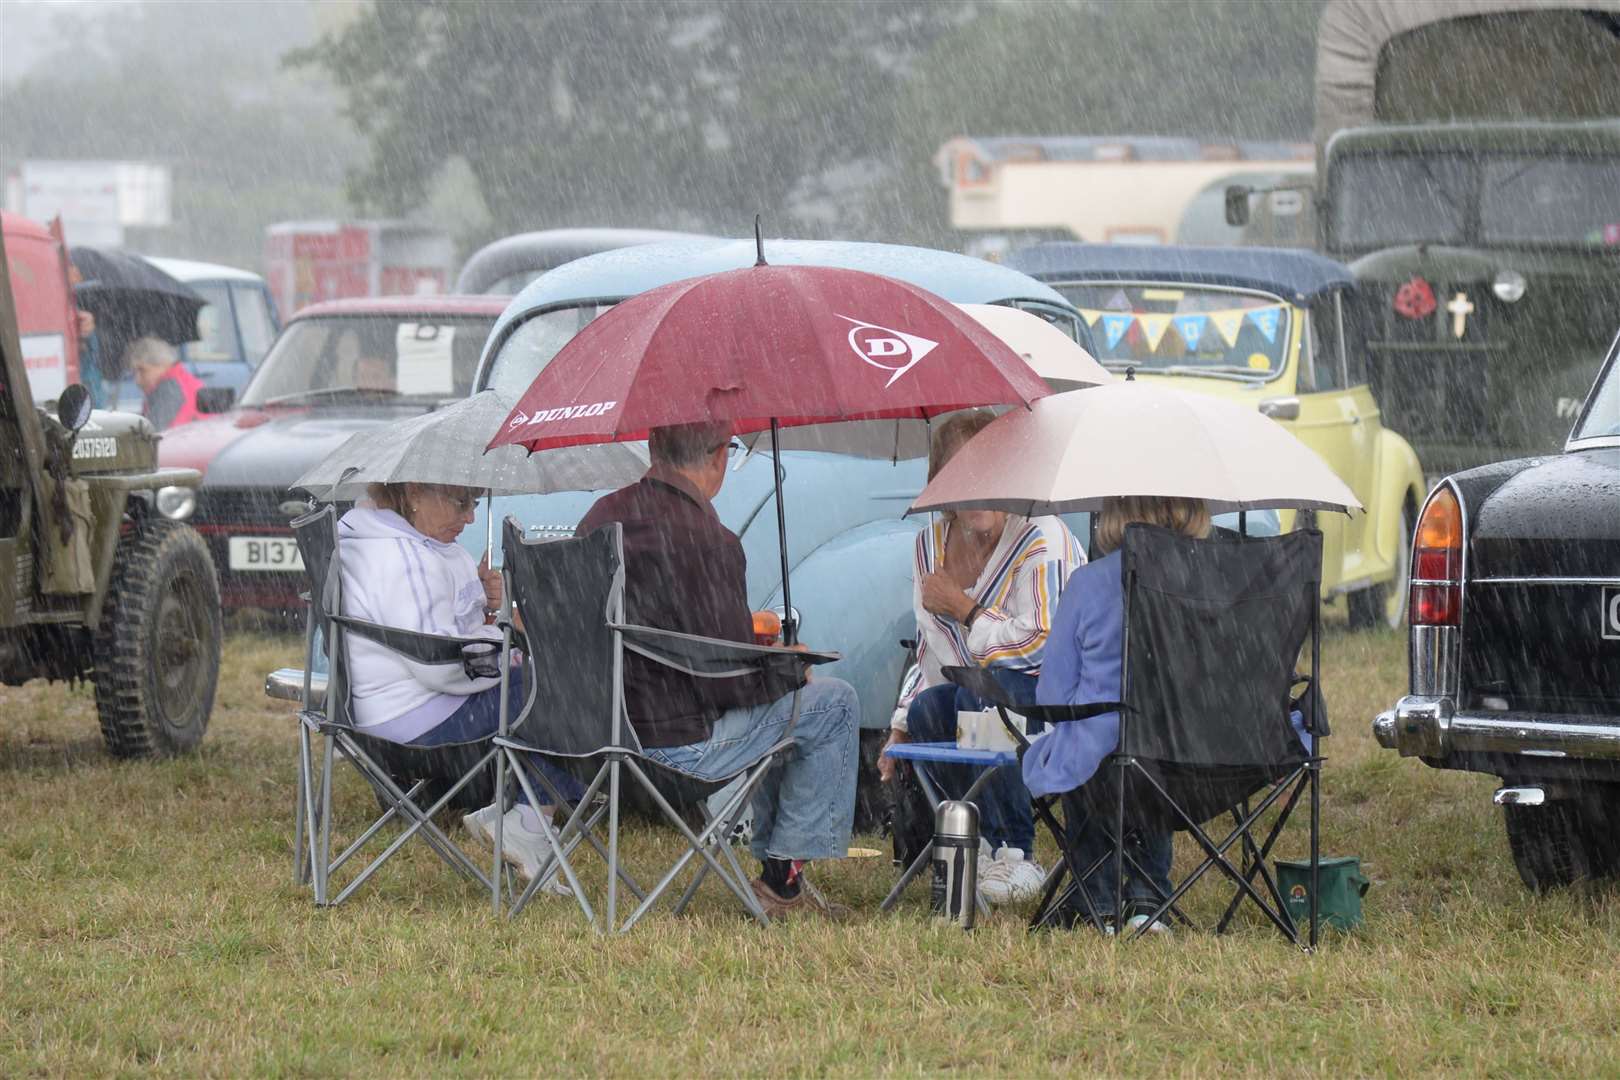 Despite heavy rain, thousands poured into Biddenden to see the tractors and country fair attractions. Picture: Chris Davey